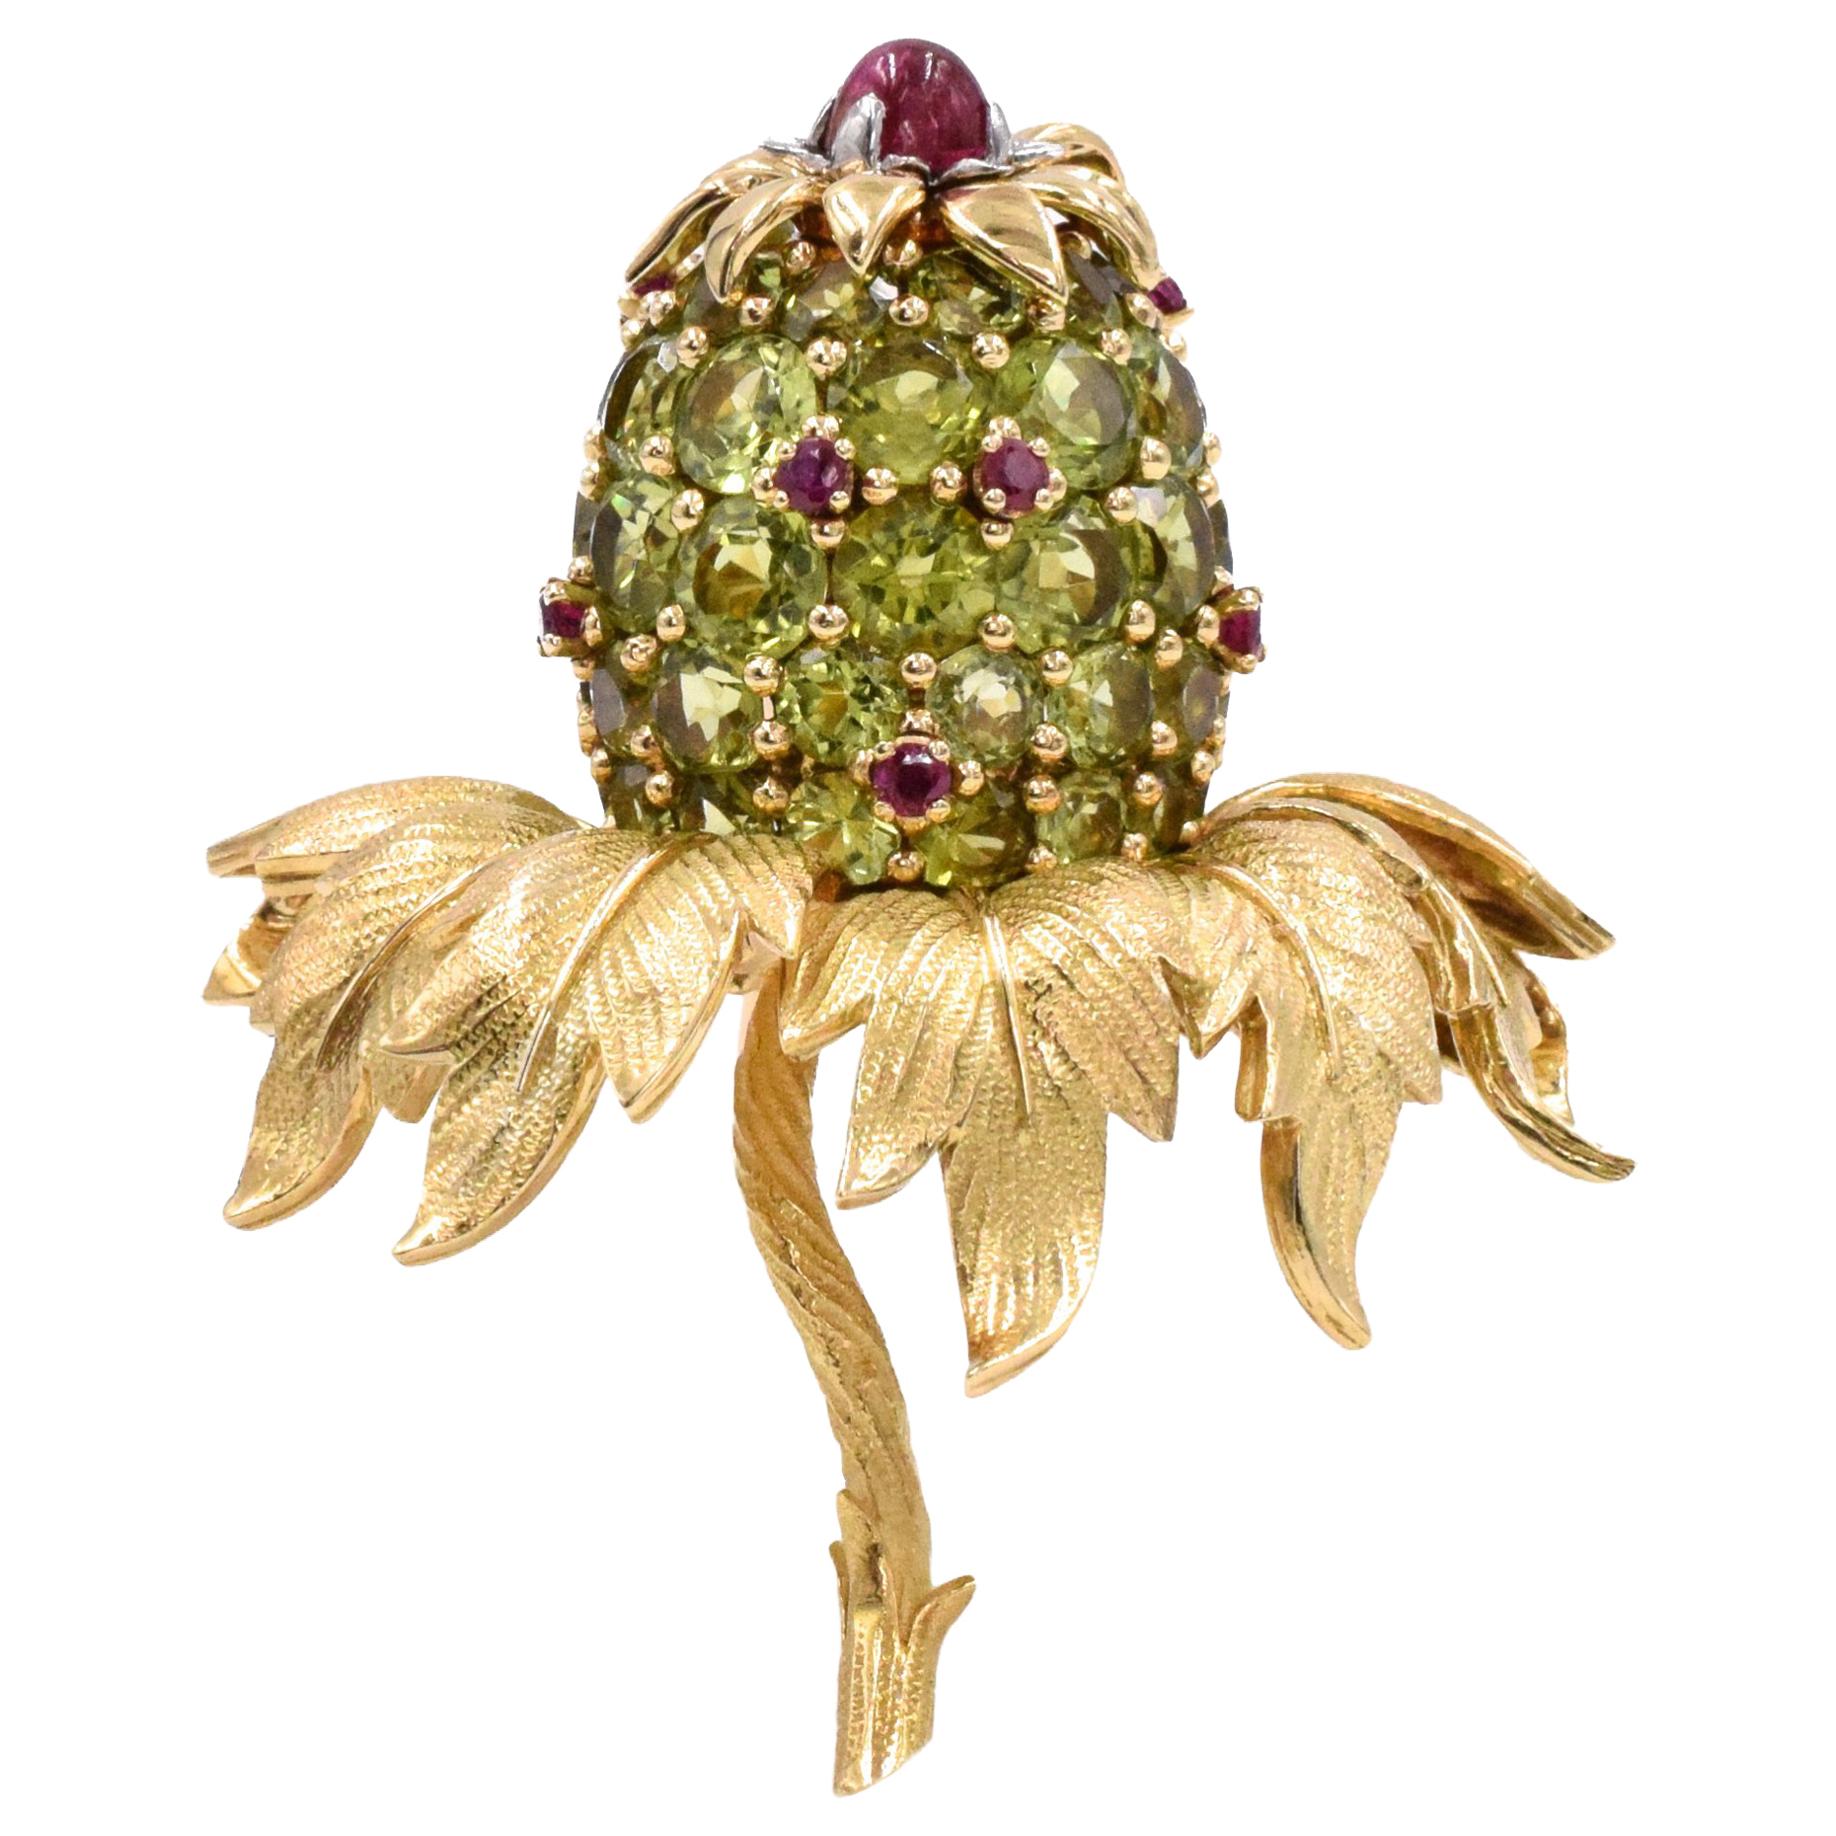 Tiffany & Co . Jean Schlumberger 'Pineapple' Peridot and Ruby Brooch